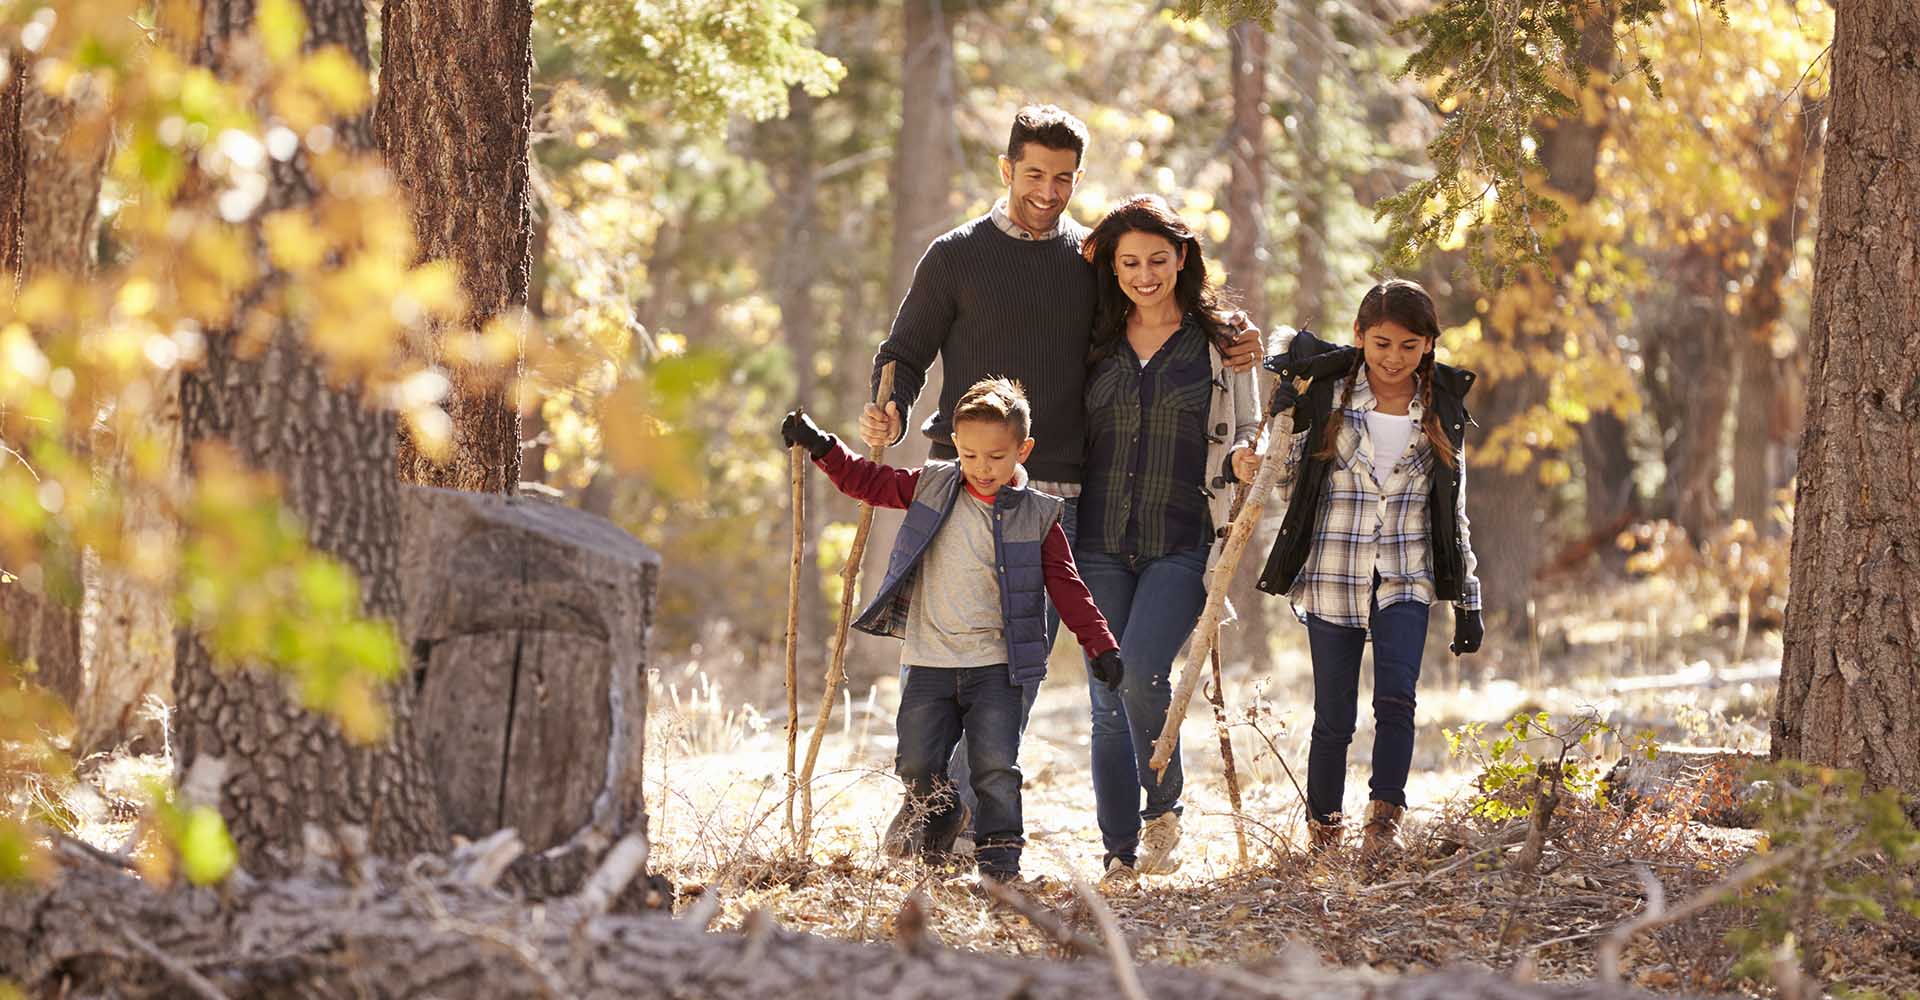 Happy Hispanic family with two children walking in a forest